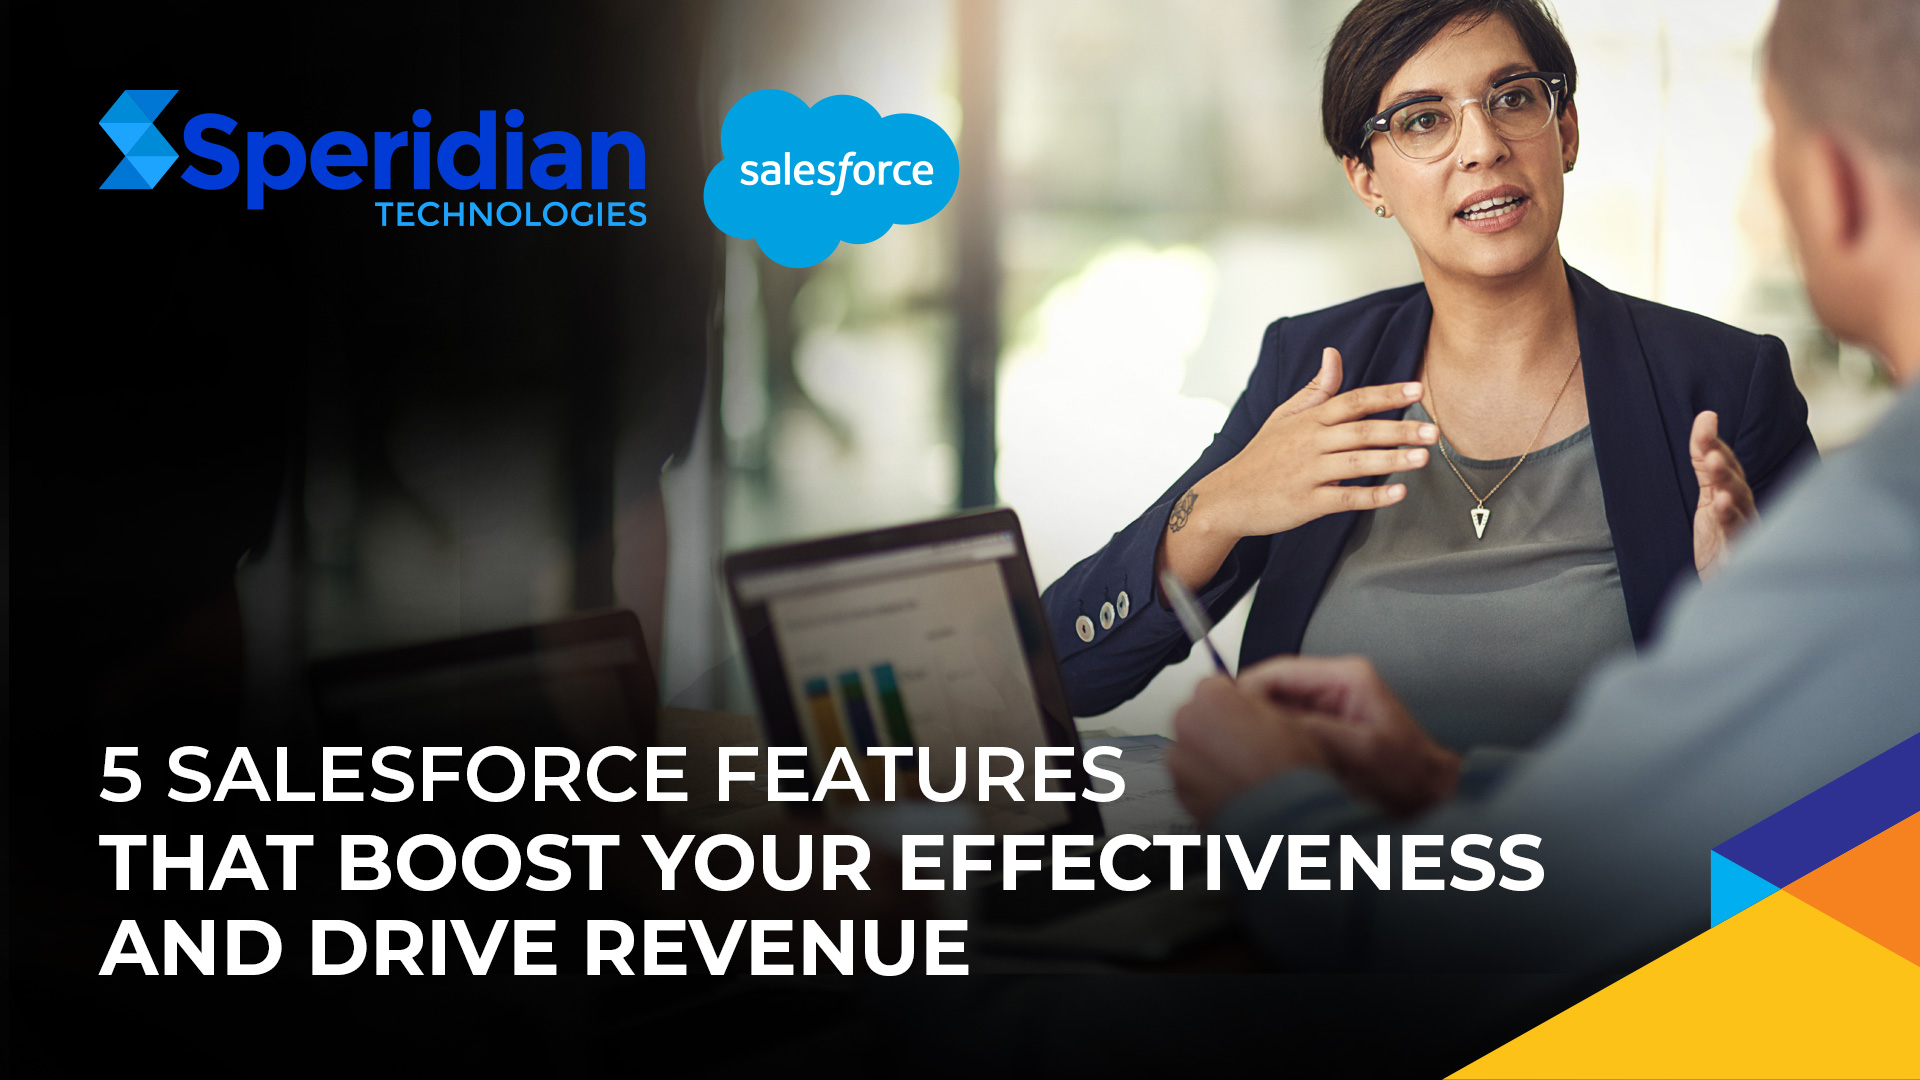 5 Salesforce Features That Boost Your Effectiveness and Drive Revenue